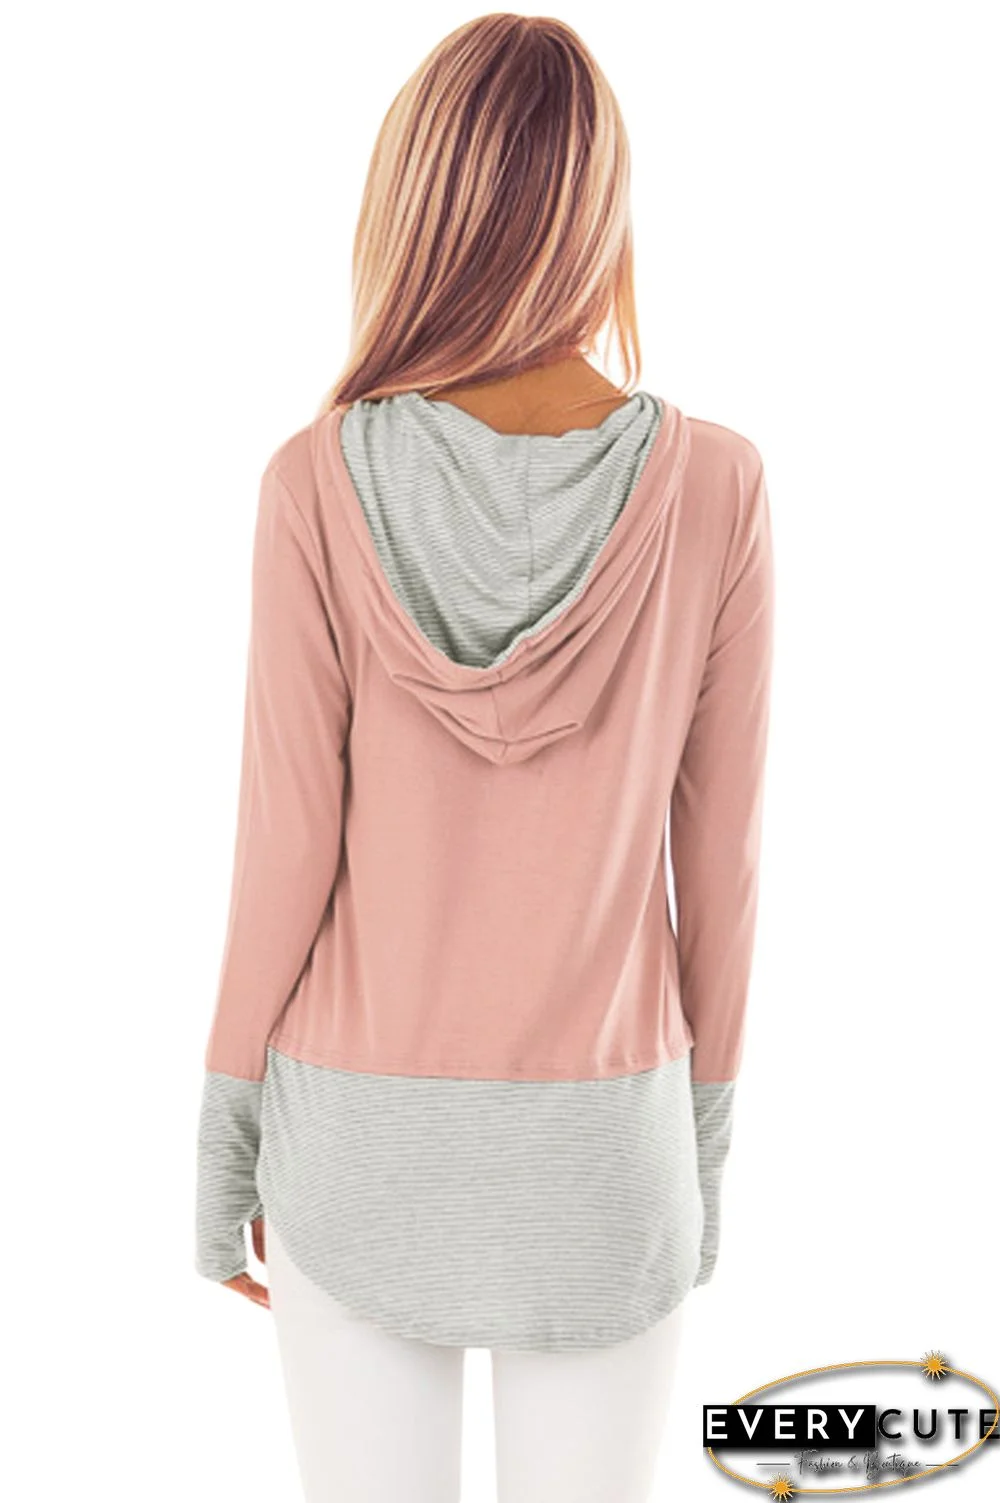 Pinstriped Patchwork Salmon Pink Thumbhole Sleeved Hoodie